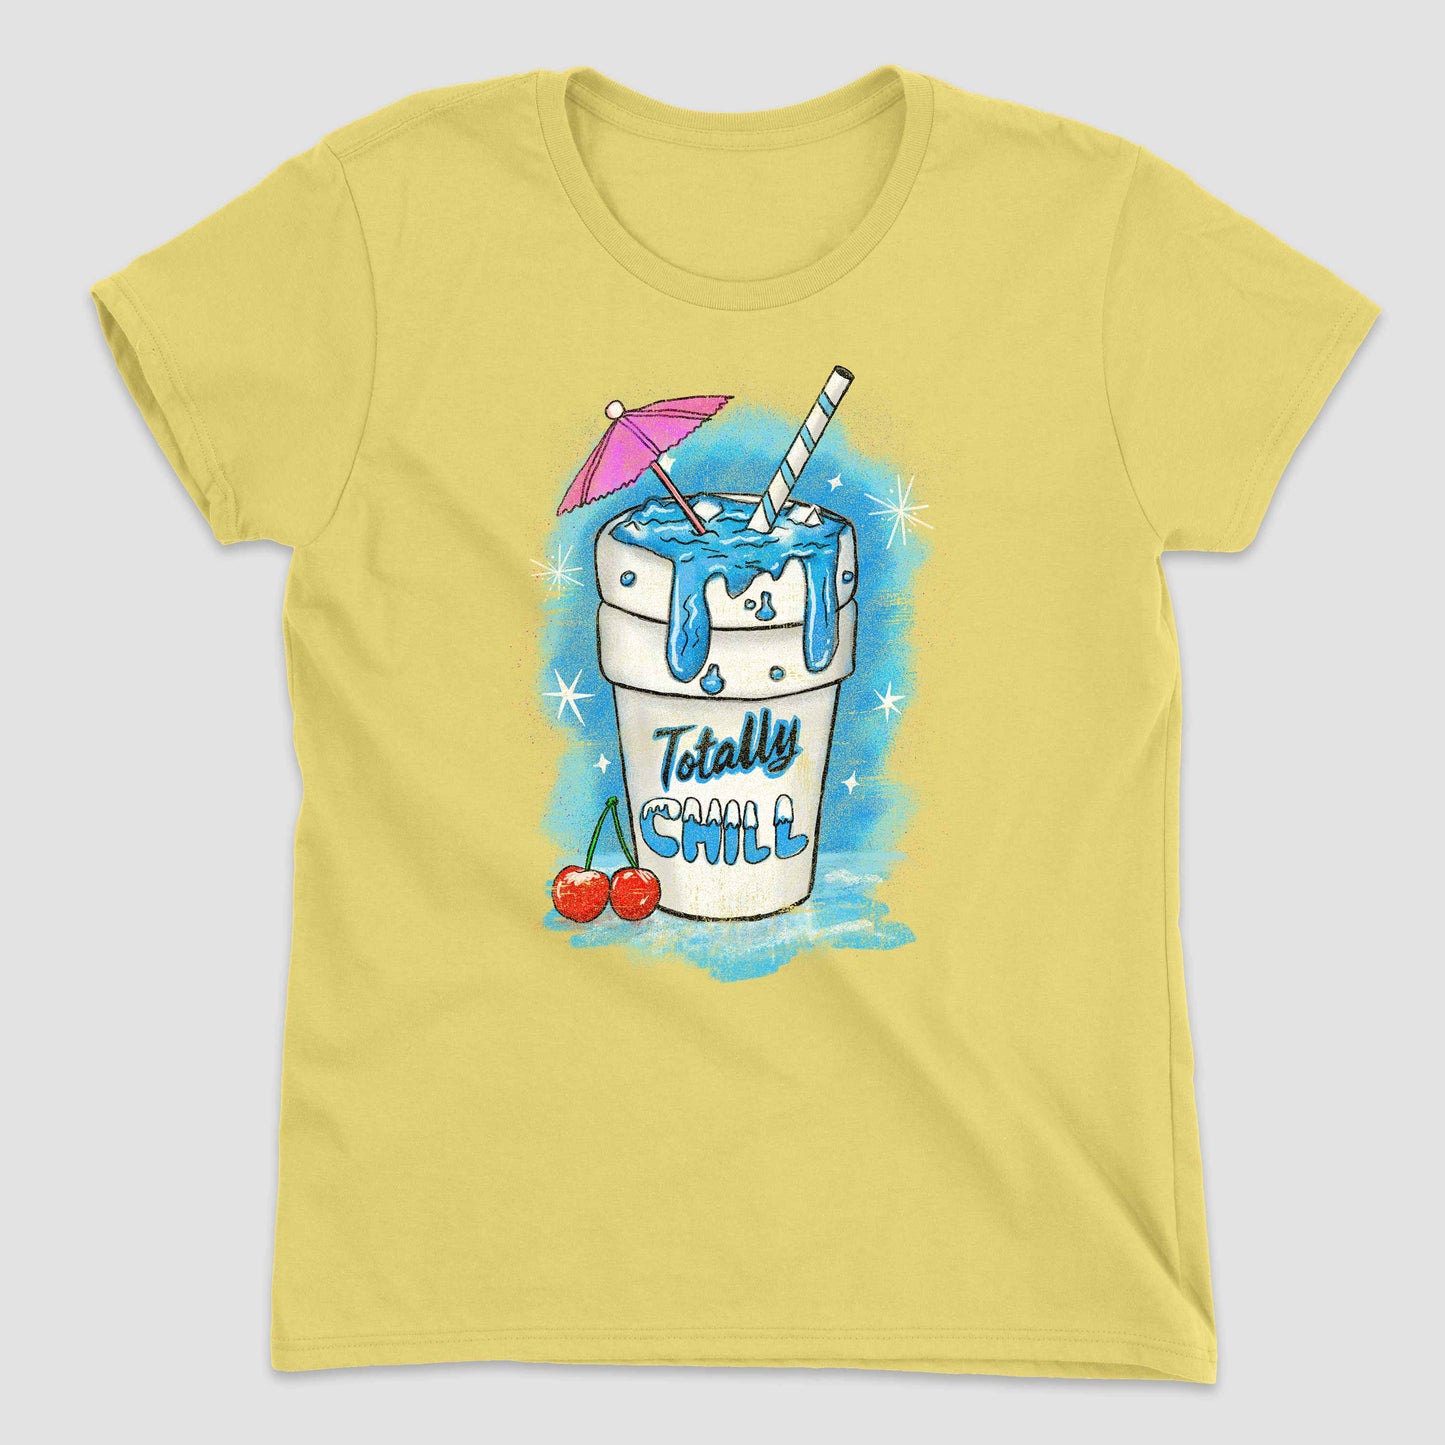 Spring Yellow Totally Chill Women's Graphic T-Shirt by Snaxtime